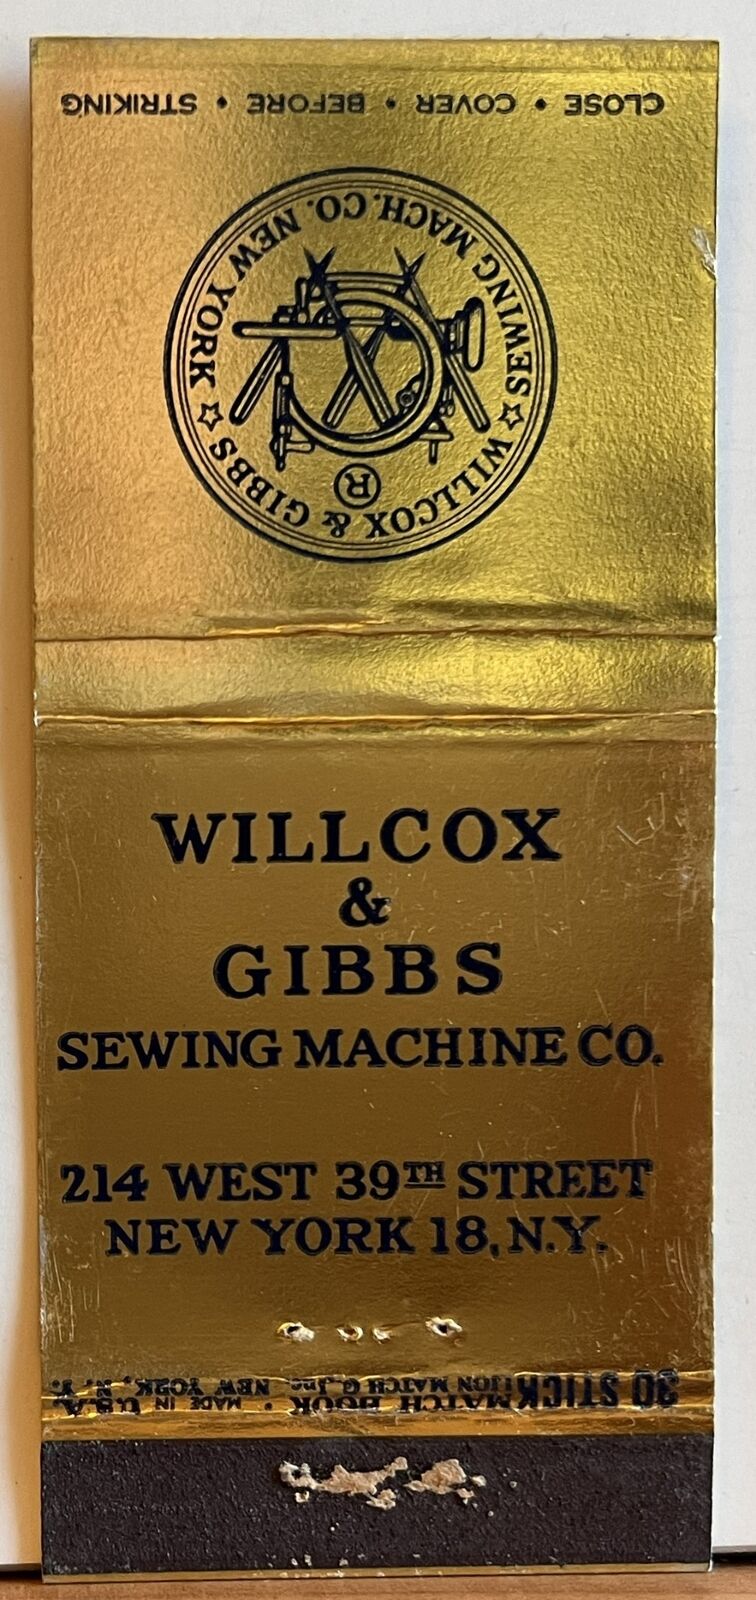 Willcox & Gibbs Sewing Machine Company New York NY Vintage Matchbook Cover